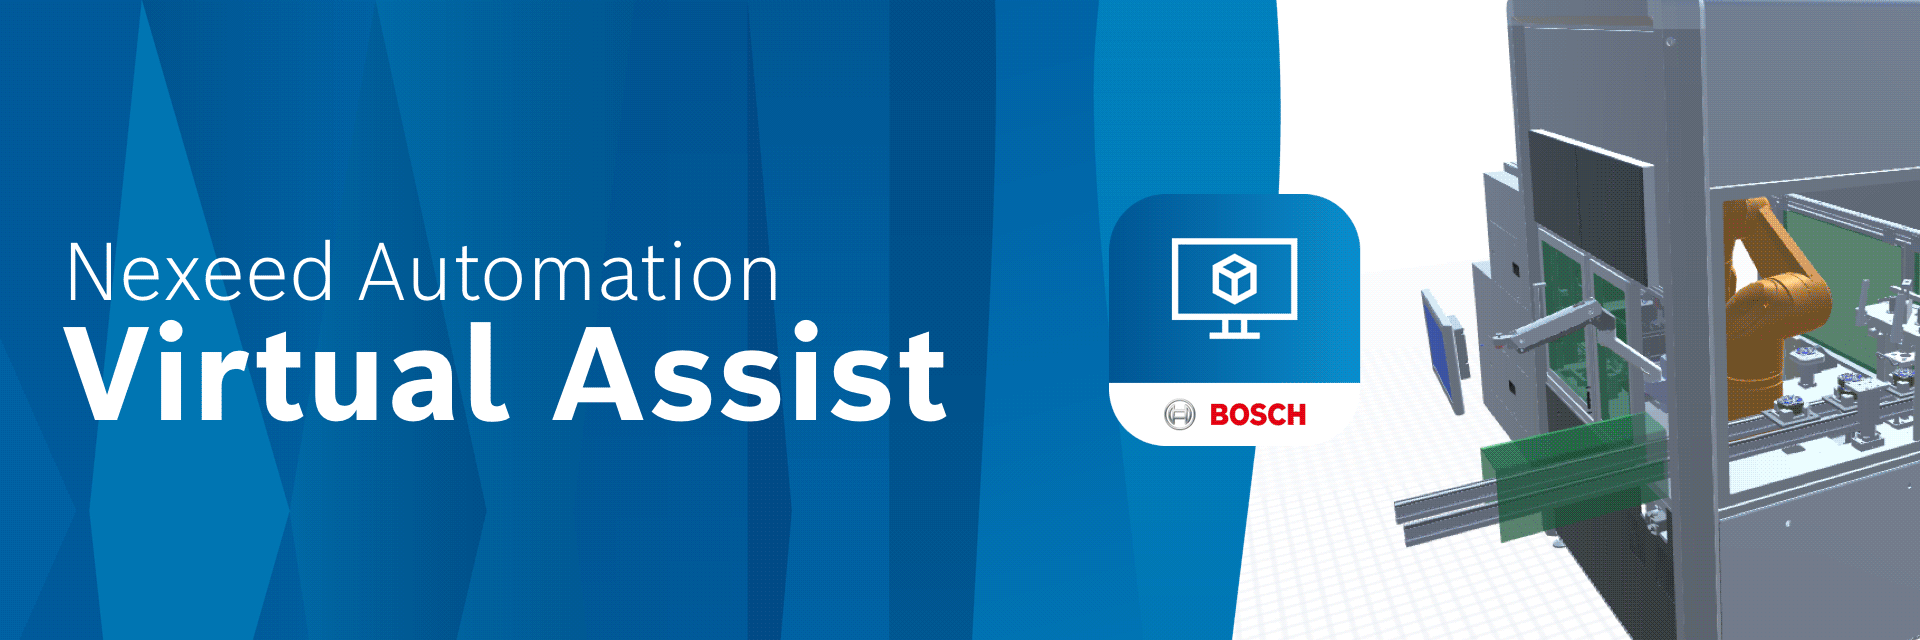 Bosch Connected Industry Nexeed Virtual Assist